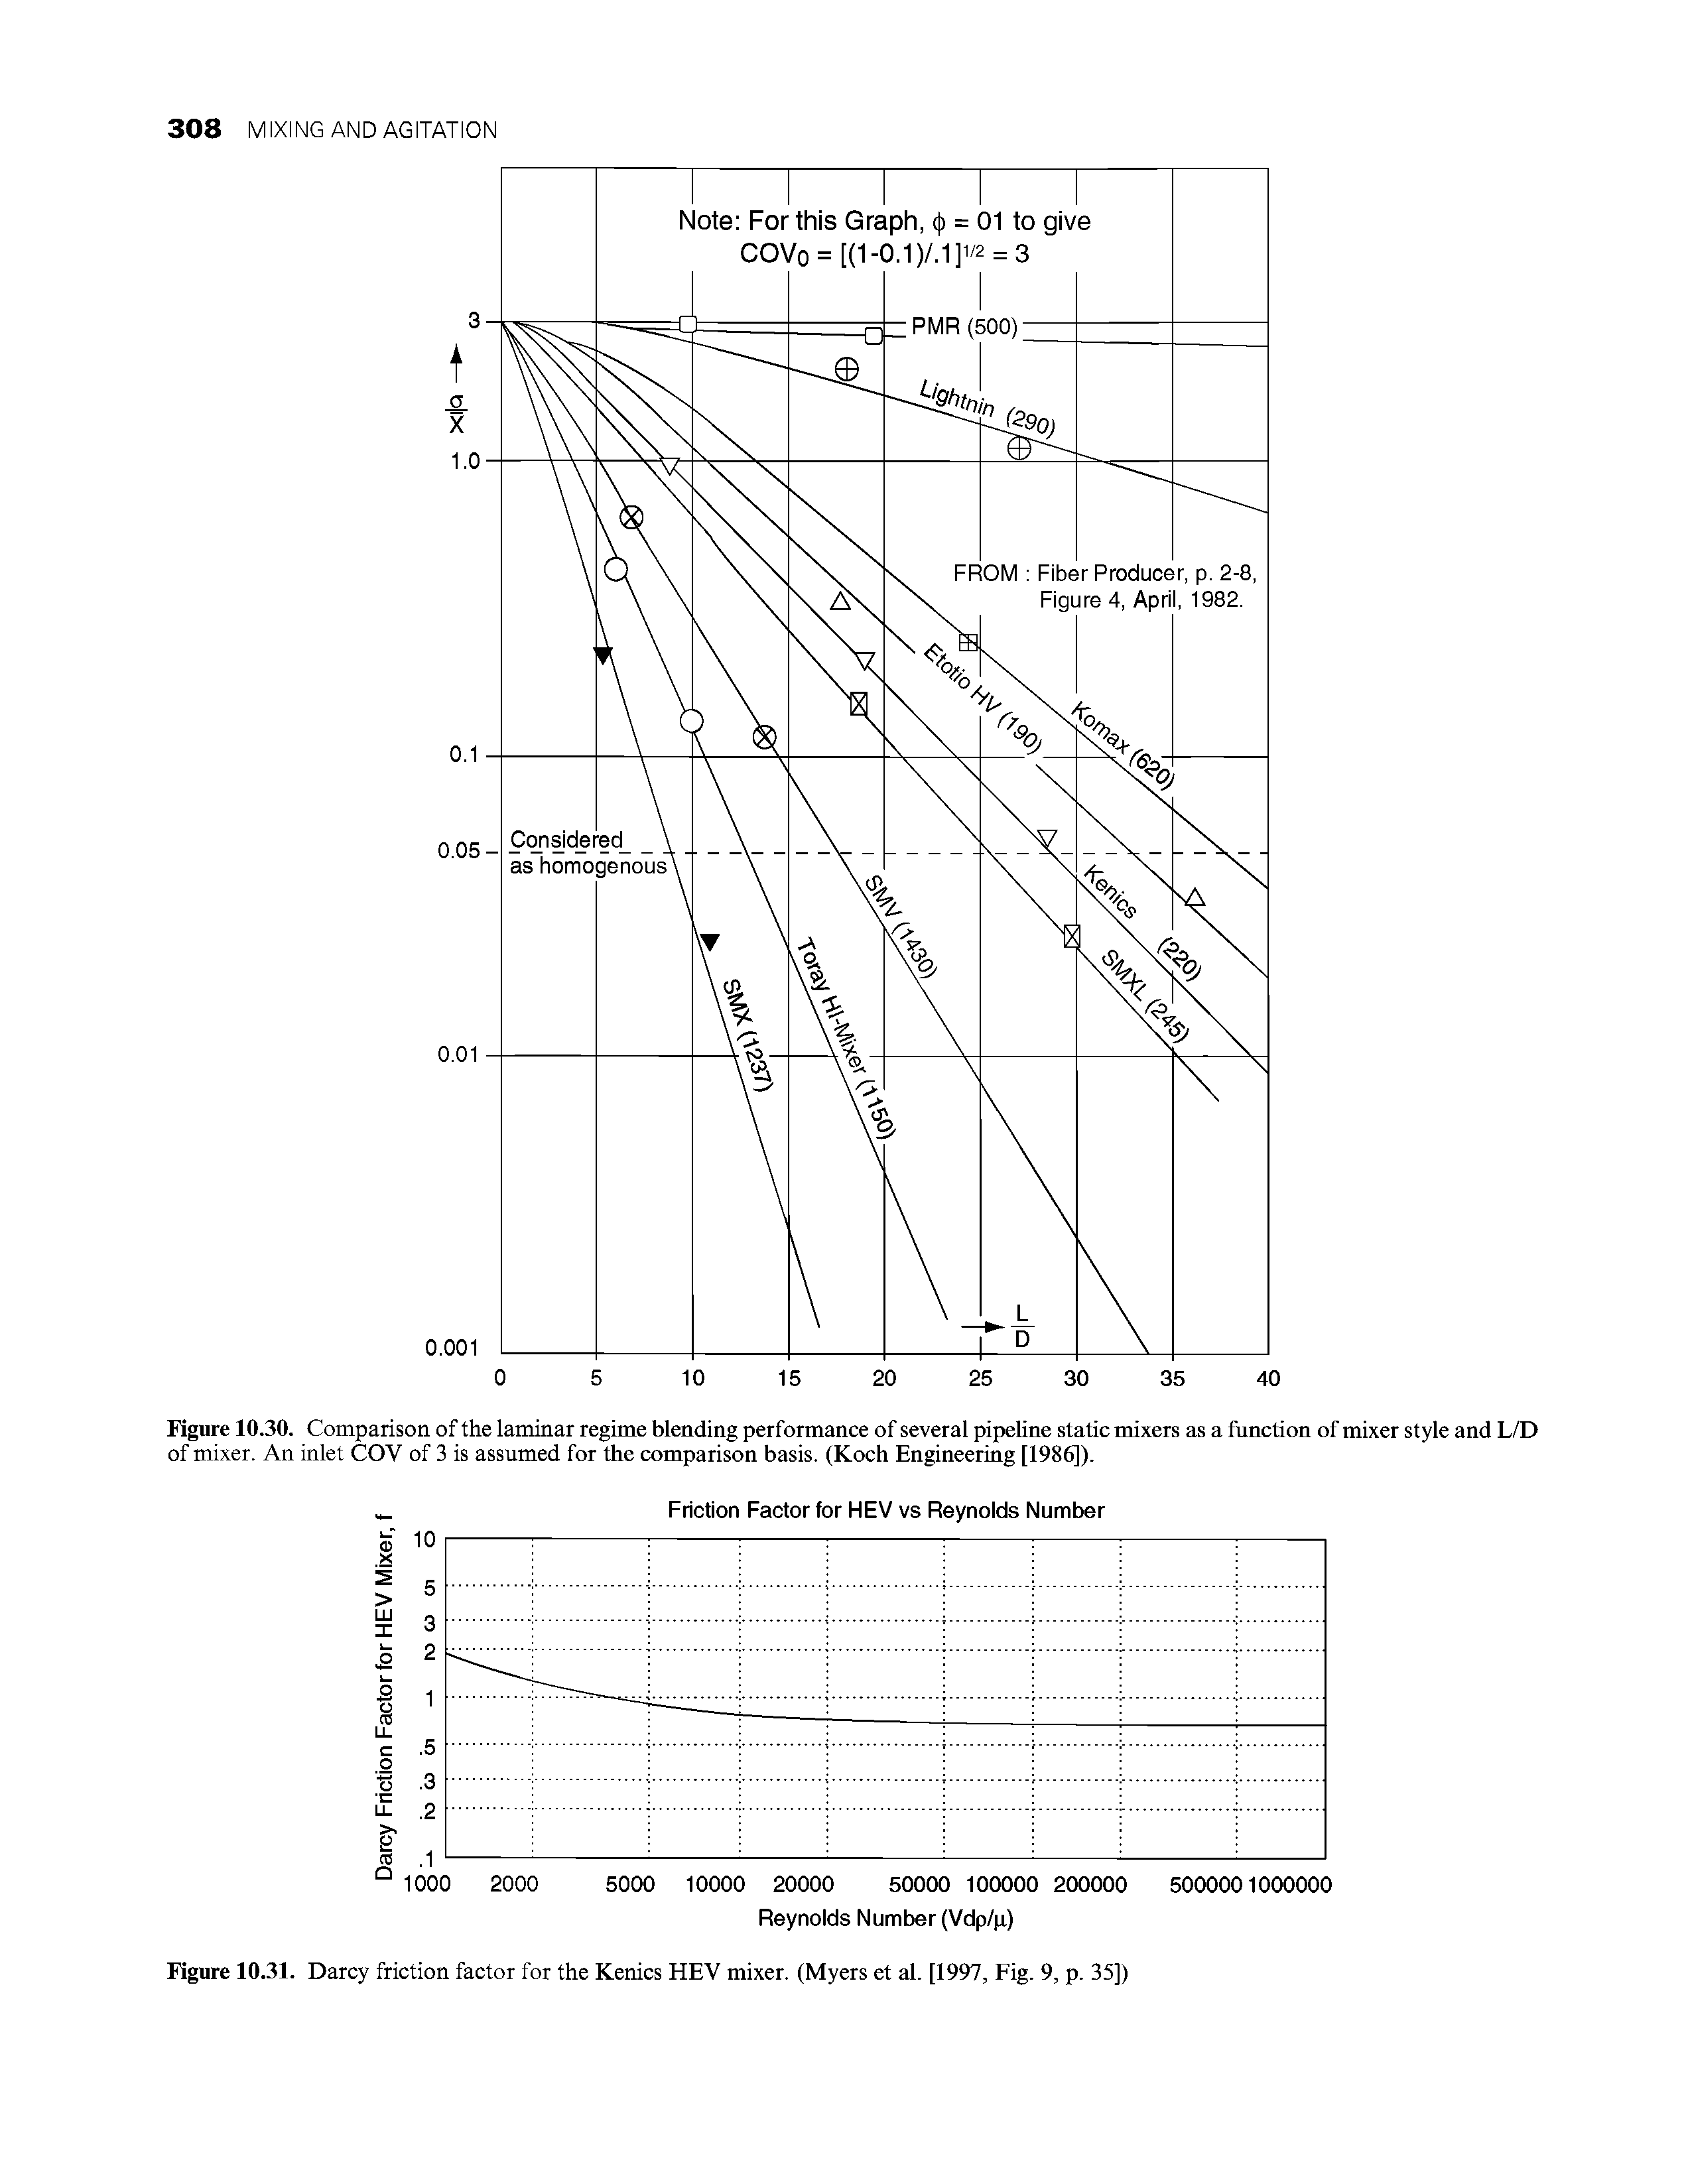 Figure 10.30. Comparison of the laminar regime blending performance of several pipeline static mixers as a function of mixer style and L/D of mixer. An inlet COV of 3 is assumed for the comparison basis. (Koch Engineering [1986]).